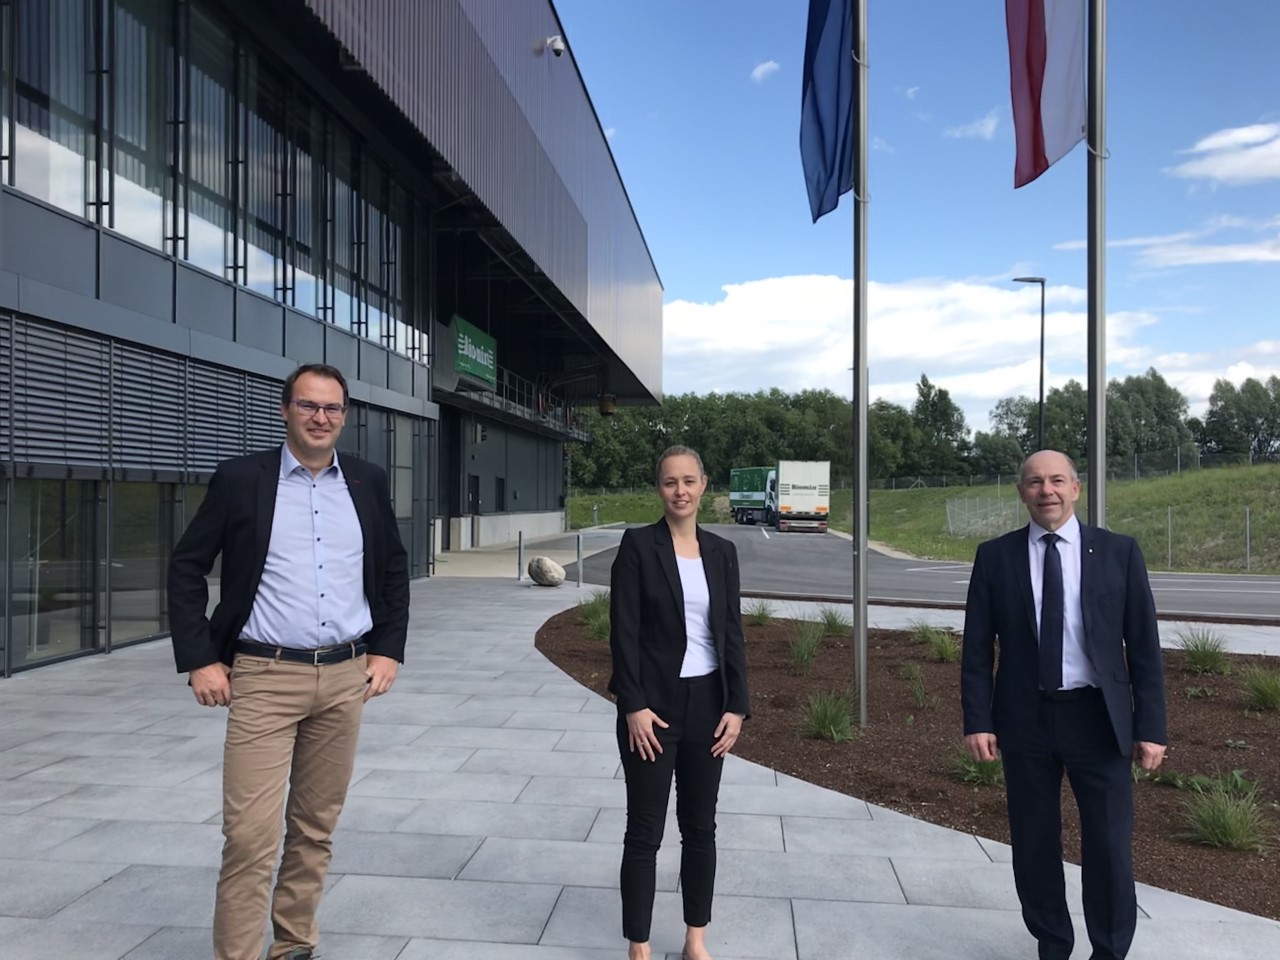 Franz Waxenecker - Managing Director of Biomin, Barbara Rüel - Head of Global Product Management Animal Nutrition at Biomin and Regional Council Member for Upper Austria Max Hiegelsberger at the new Biomin production facility in Haag am Hausruck, Austria.